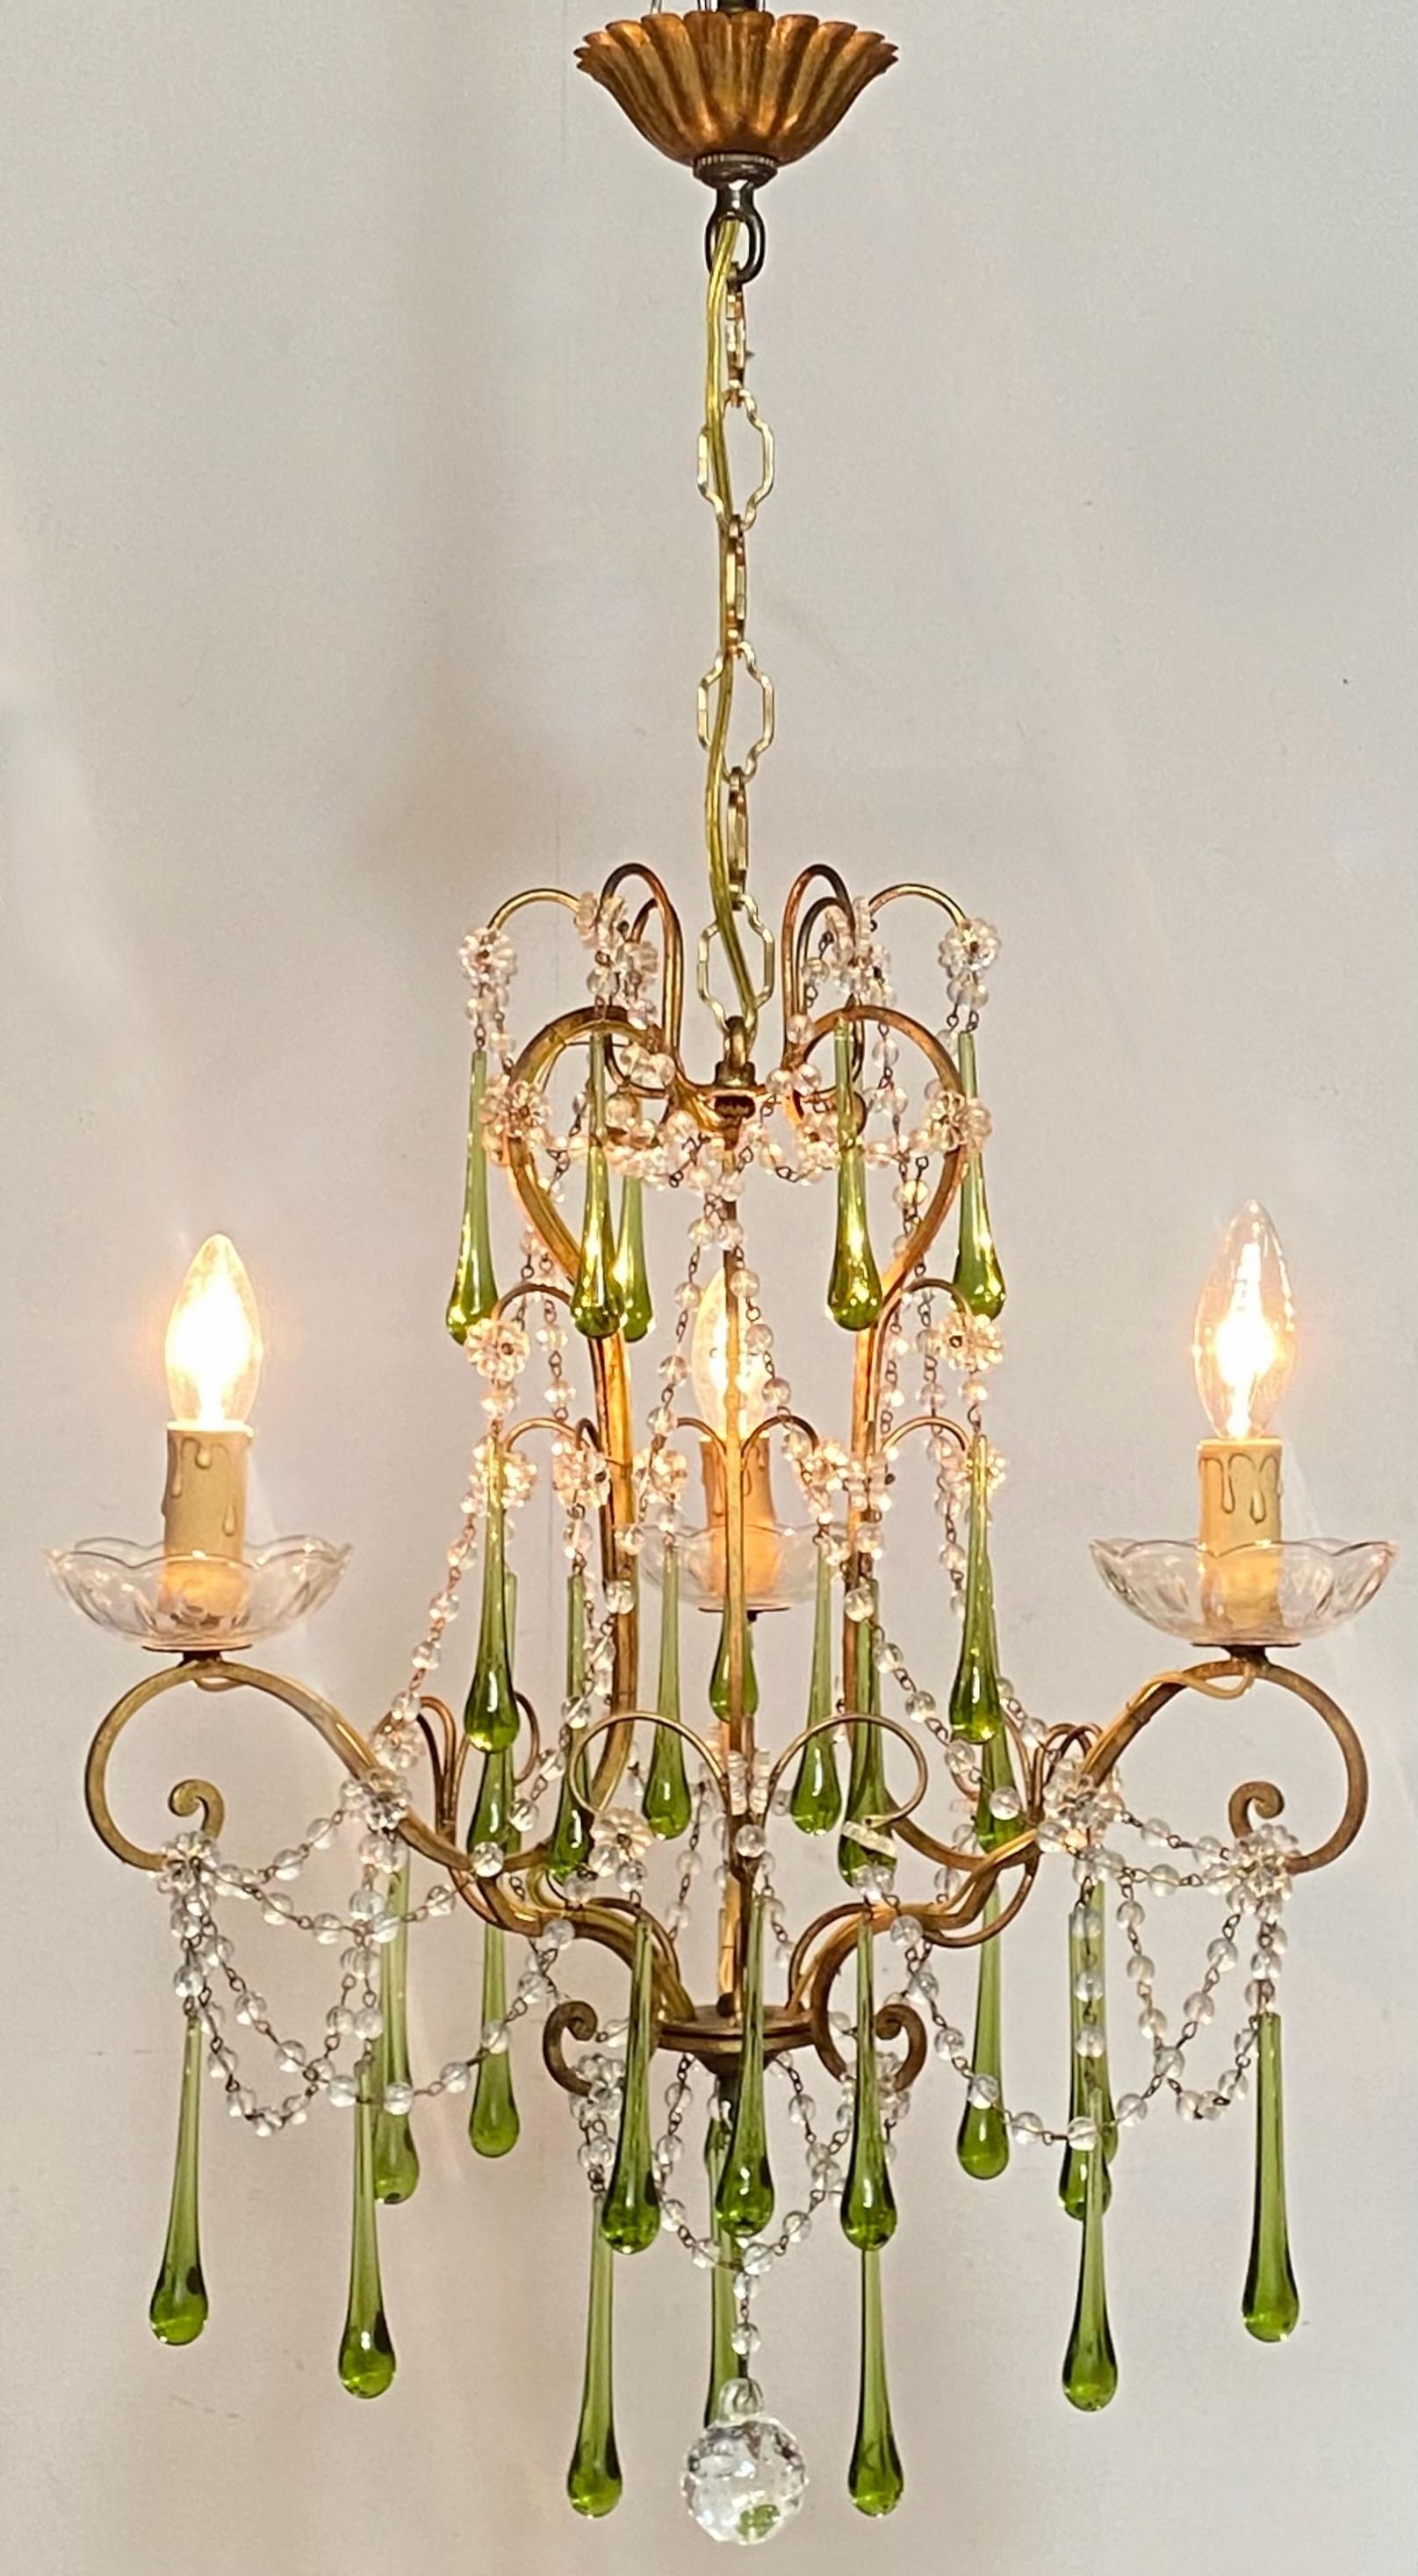 A small size vintage crystal and glass pendant chandelier. Having light green and clear glass hanging drops, and draped glass beaded swags.
Recently cleaned, and re-wired. Ready to install.
Perfect for a small room, washroom or hallway.
Italy,